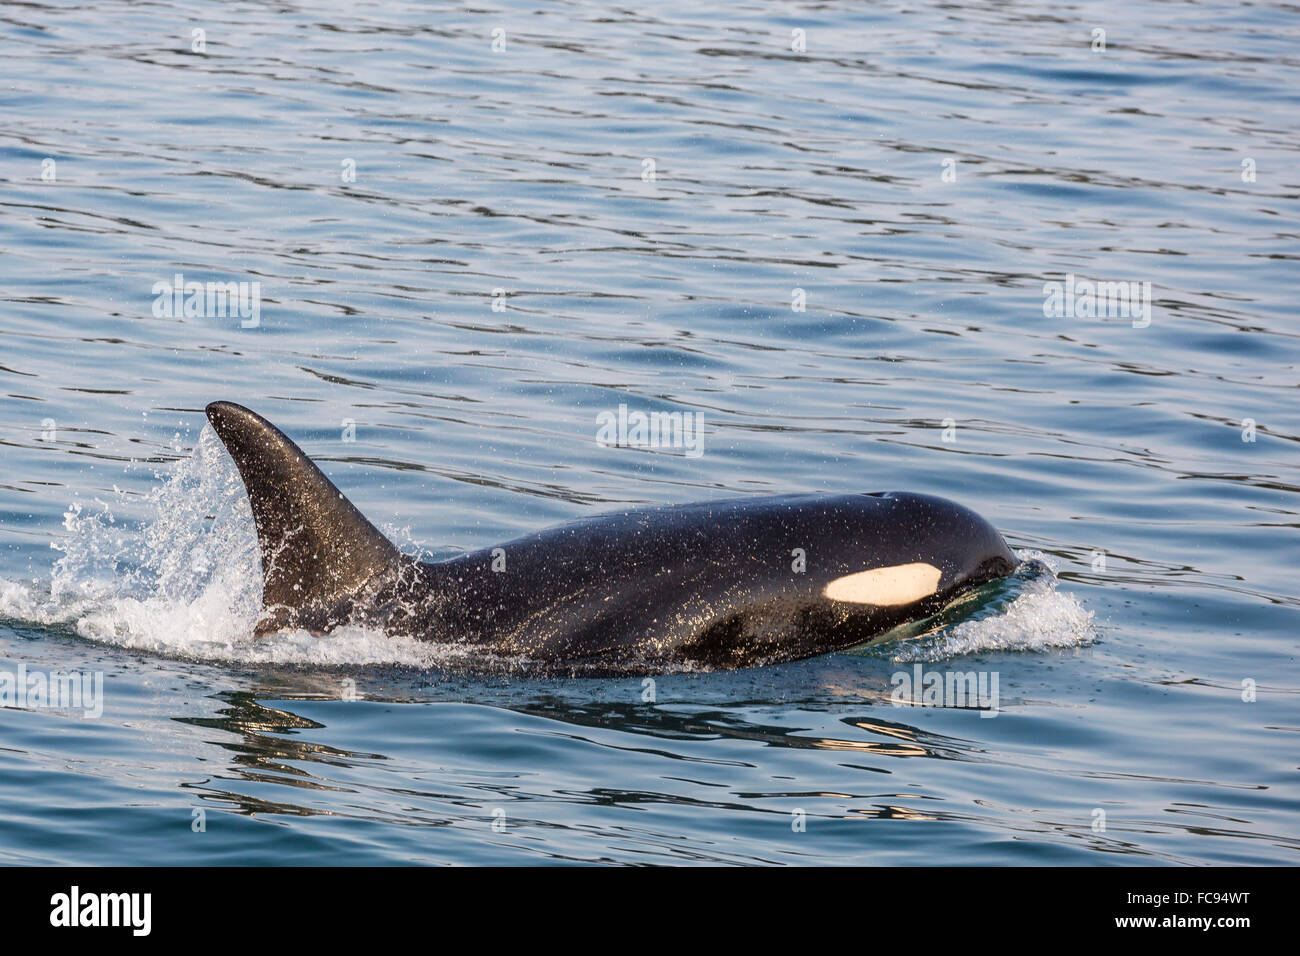 An adult killer whale (Orcinus orca) surfacing in Glacier Bay National Park, Southeast Alaska, United States of America Stock Photo